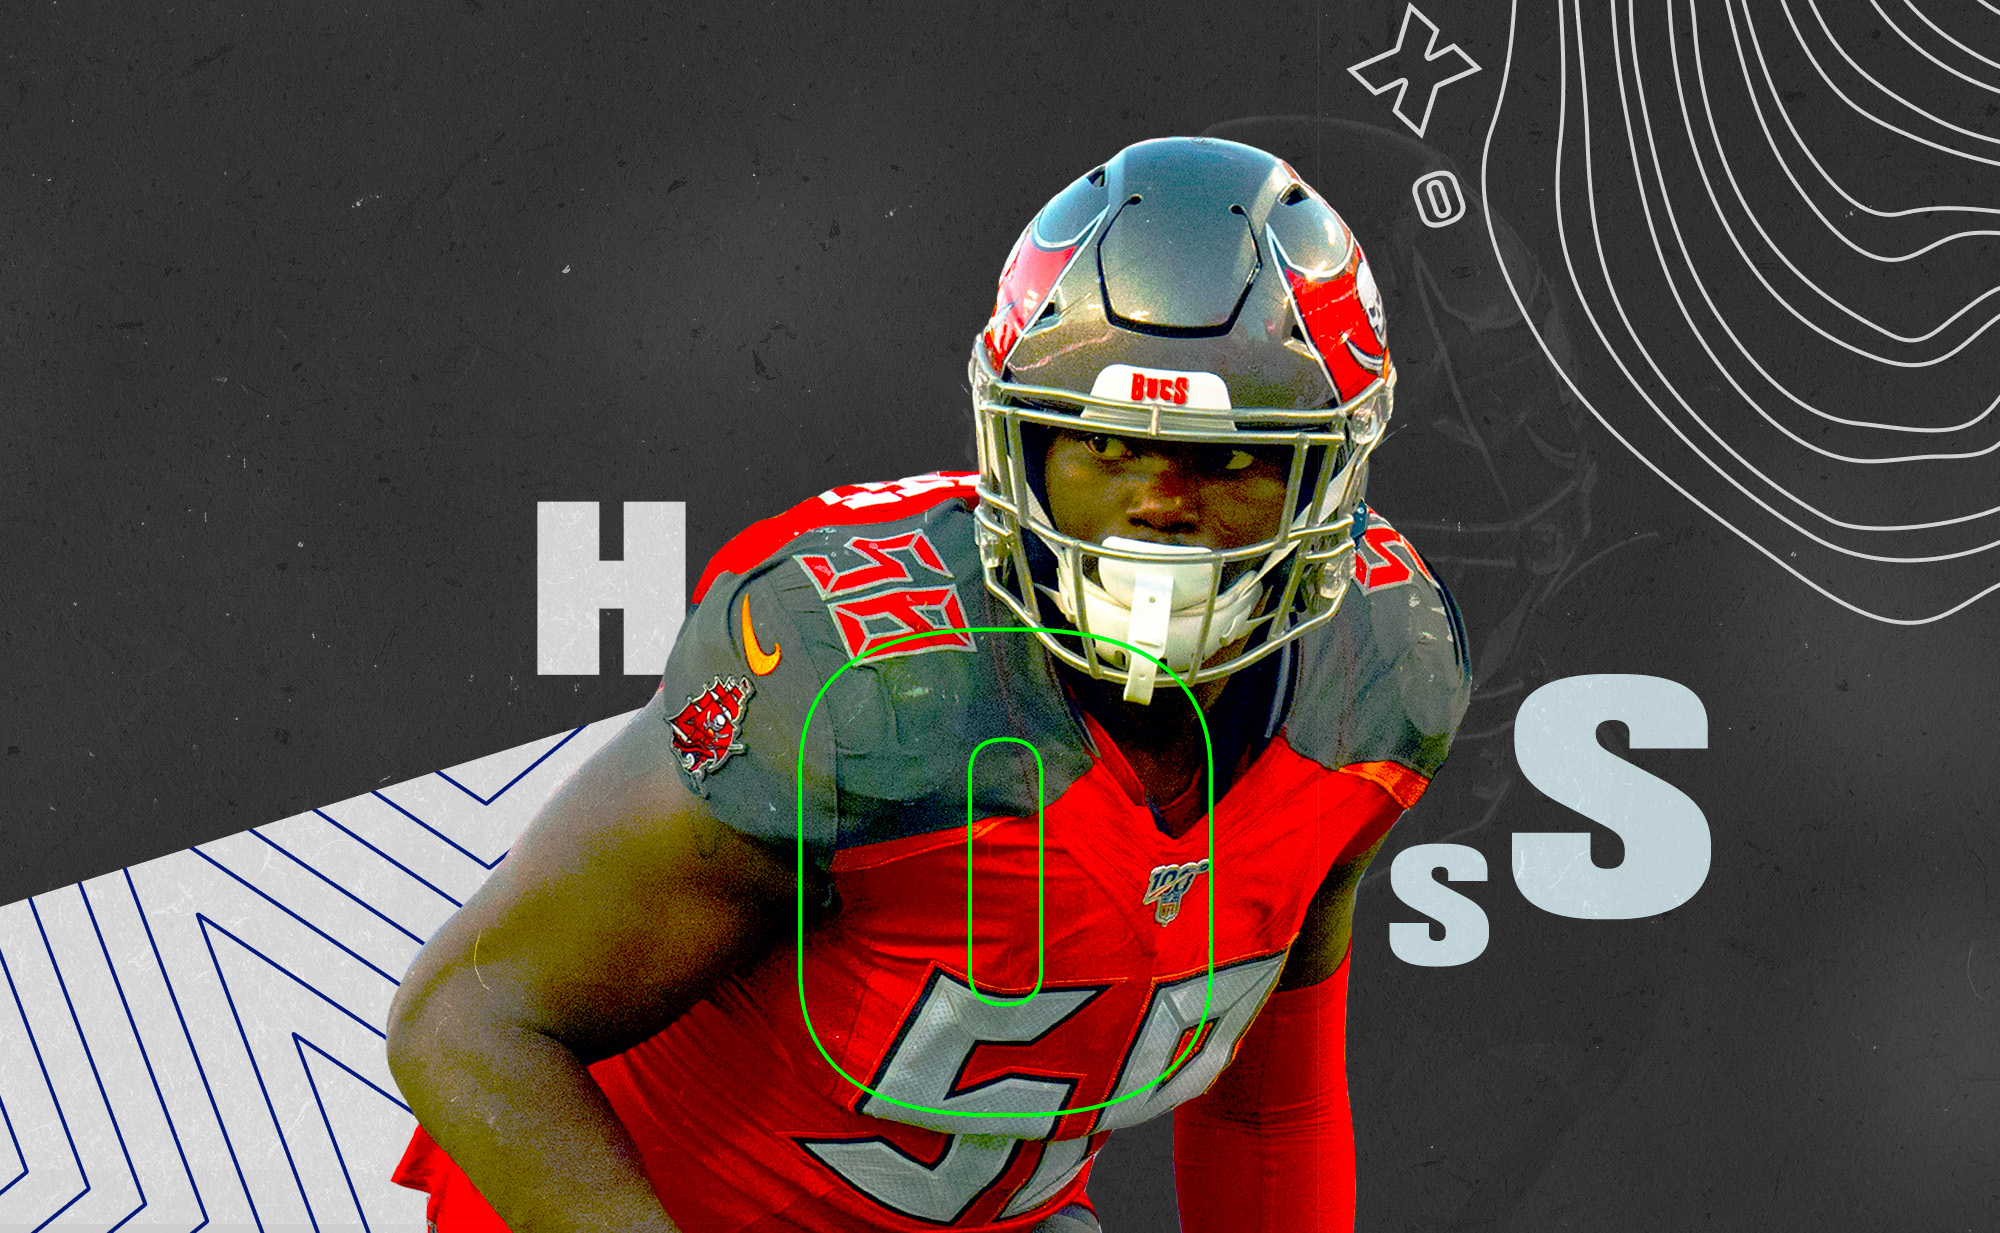 Buccaneers defensive end Shaquill Barrett superimposed on a black and white background with the word “Hoss”